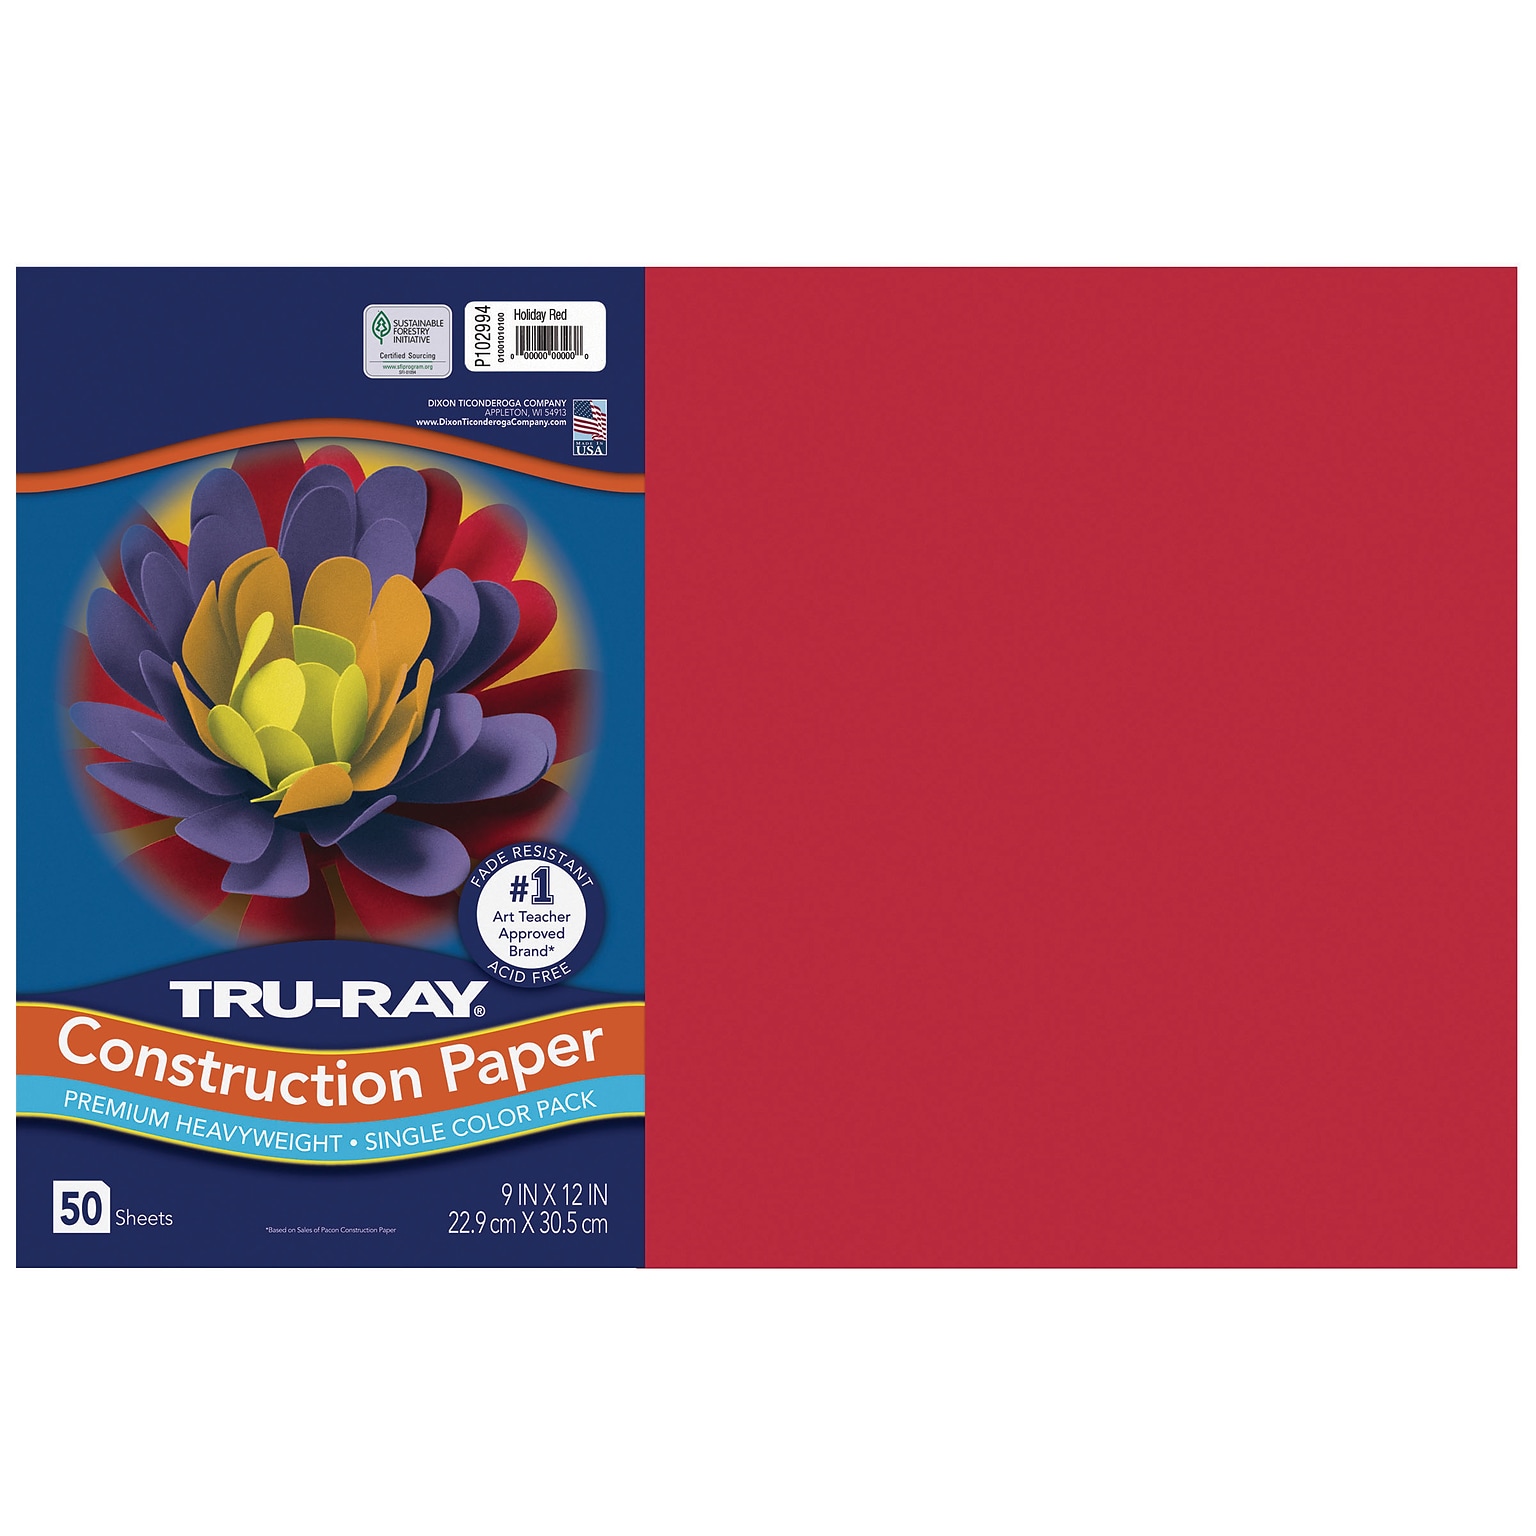 Tru-Ray 12 x 18 Construction Paper, Holiday Red, 50 Sheets (P102994)